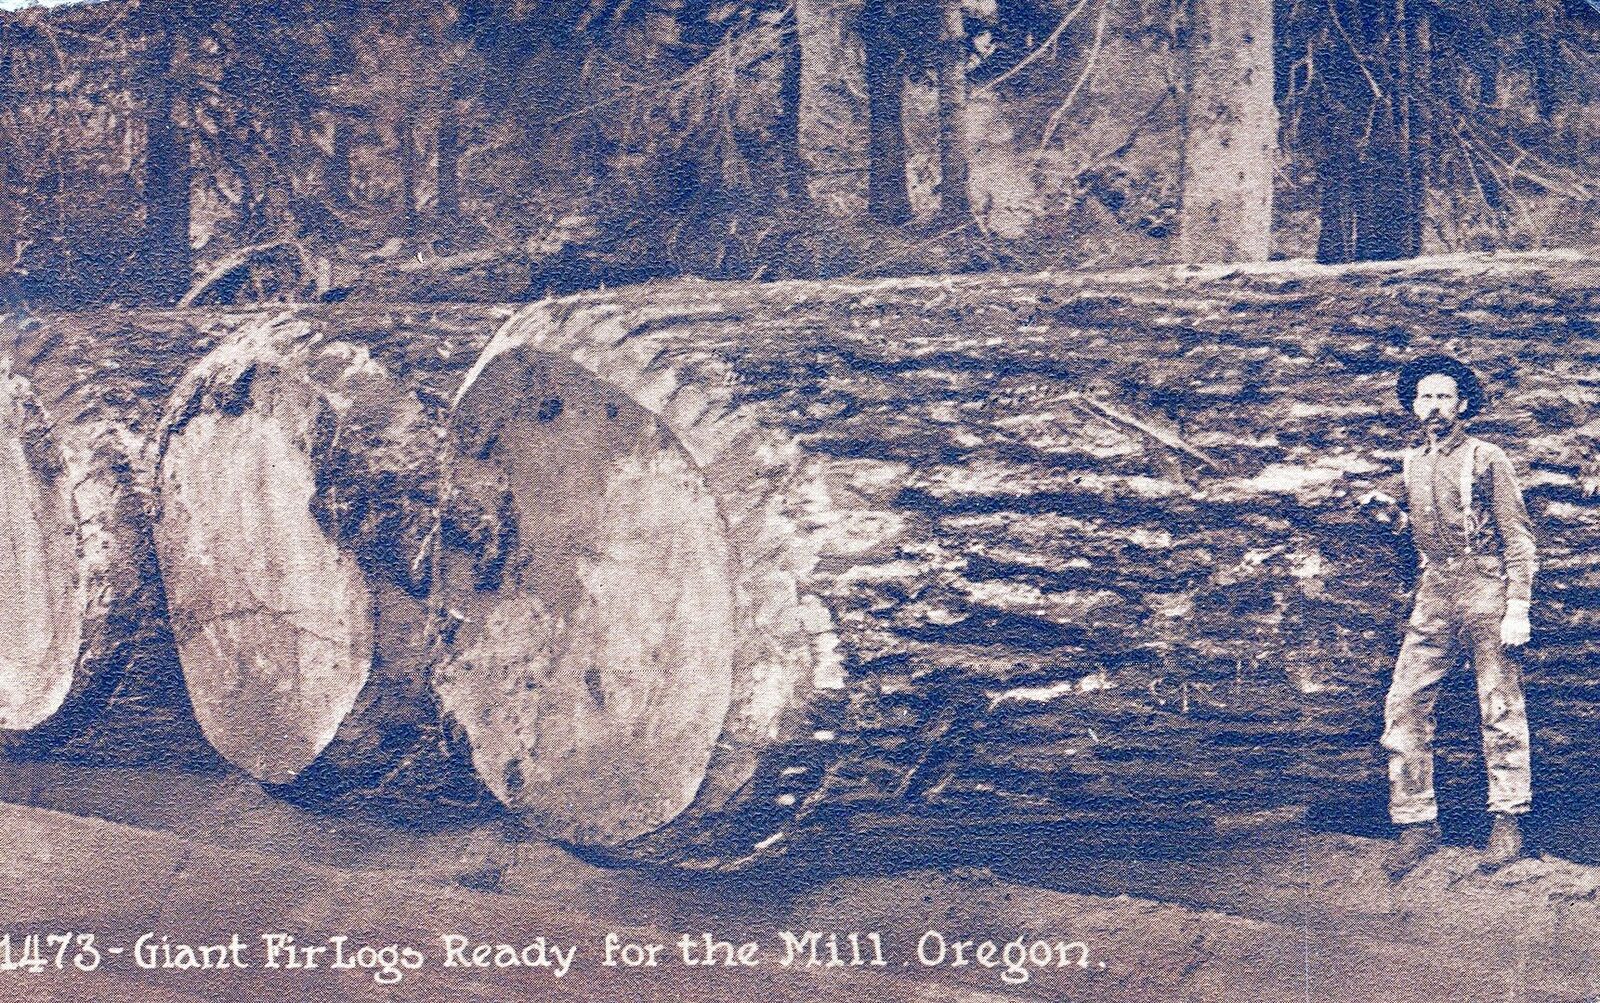 OREGON OR - Giant Fir Logs Ready For The Mill Postcard - 1914